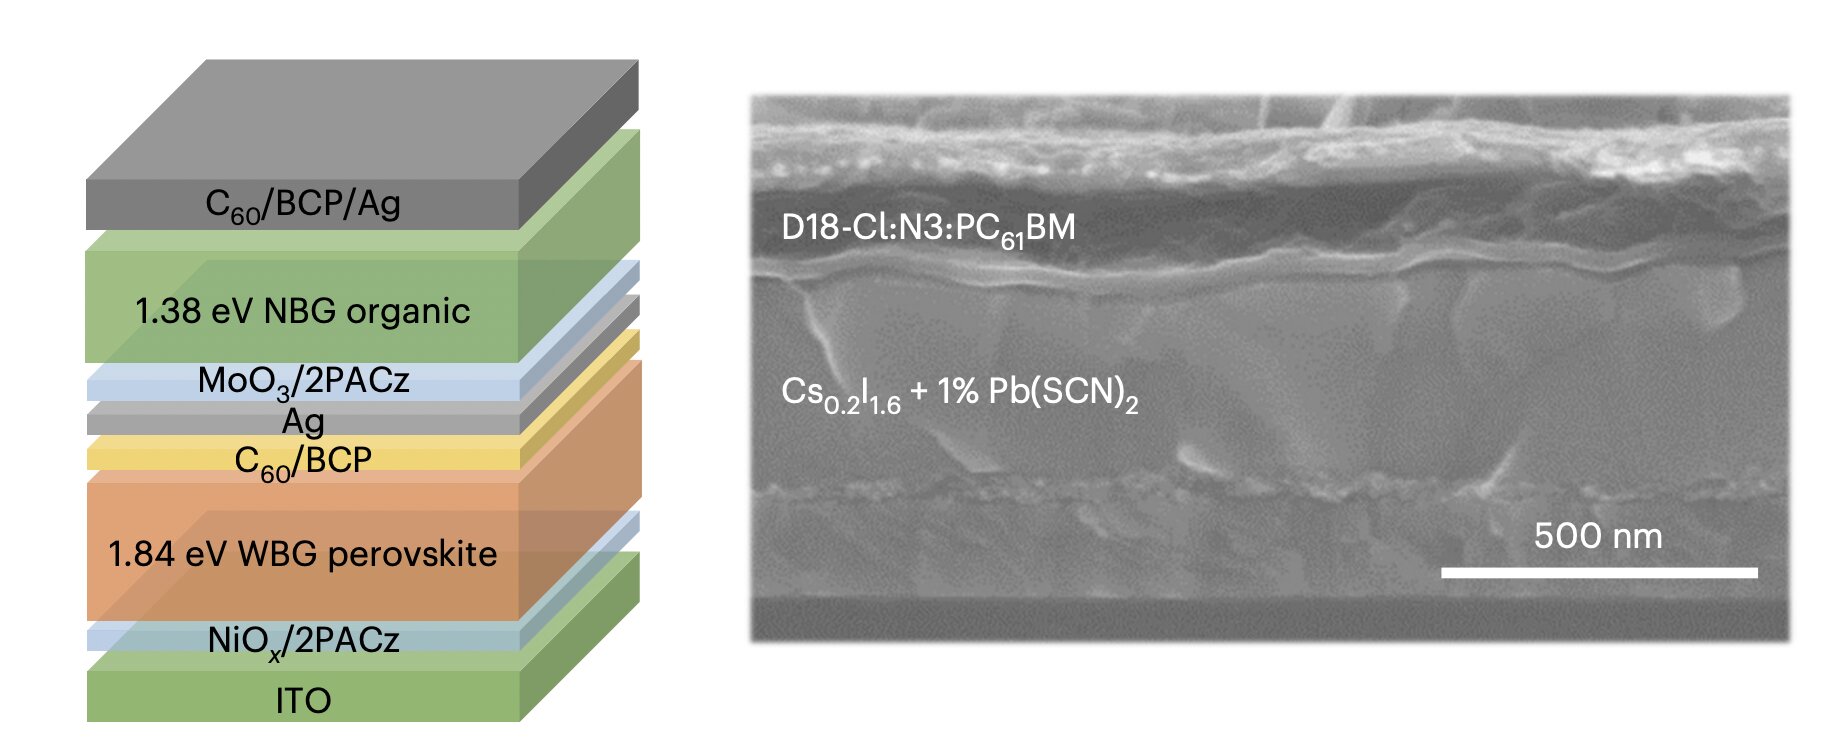 #A strategy to boost the efficiency of perovskite/organic solar cells